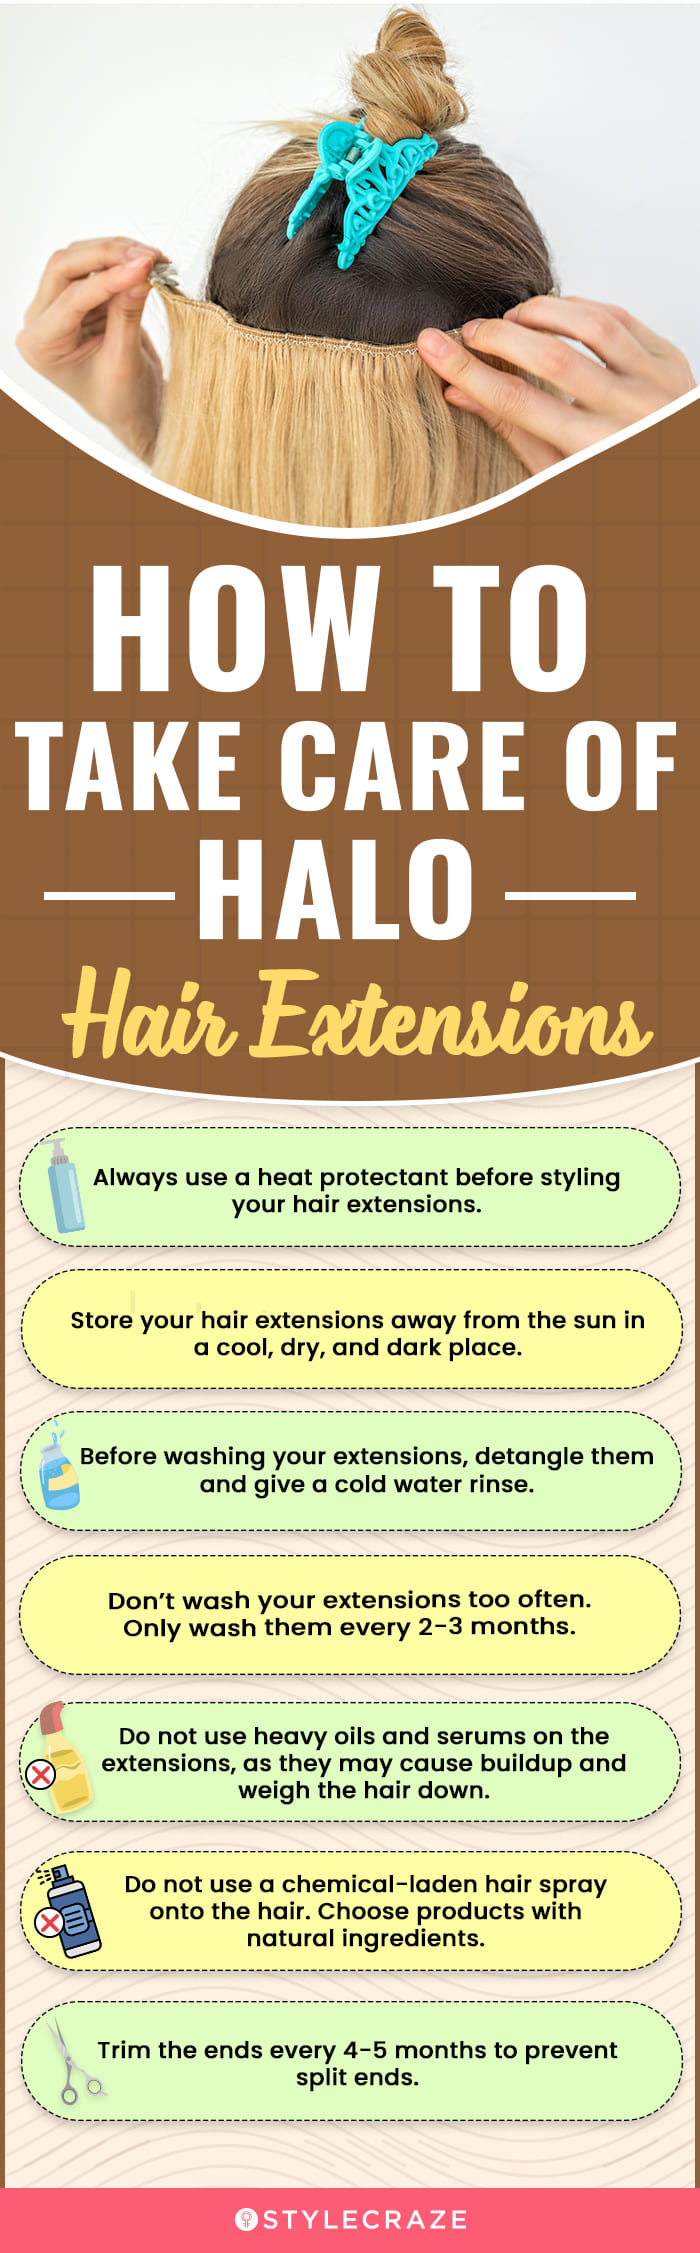 How To Take Care Of Halo Hair Extensions (infographic)